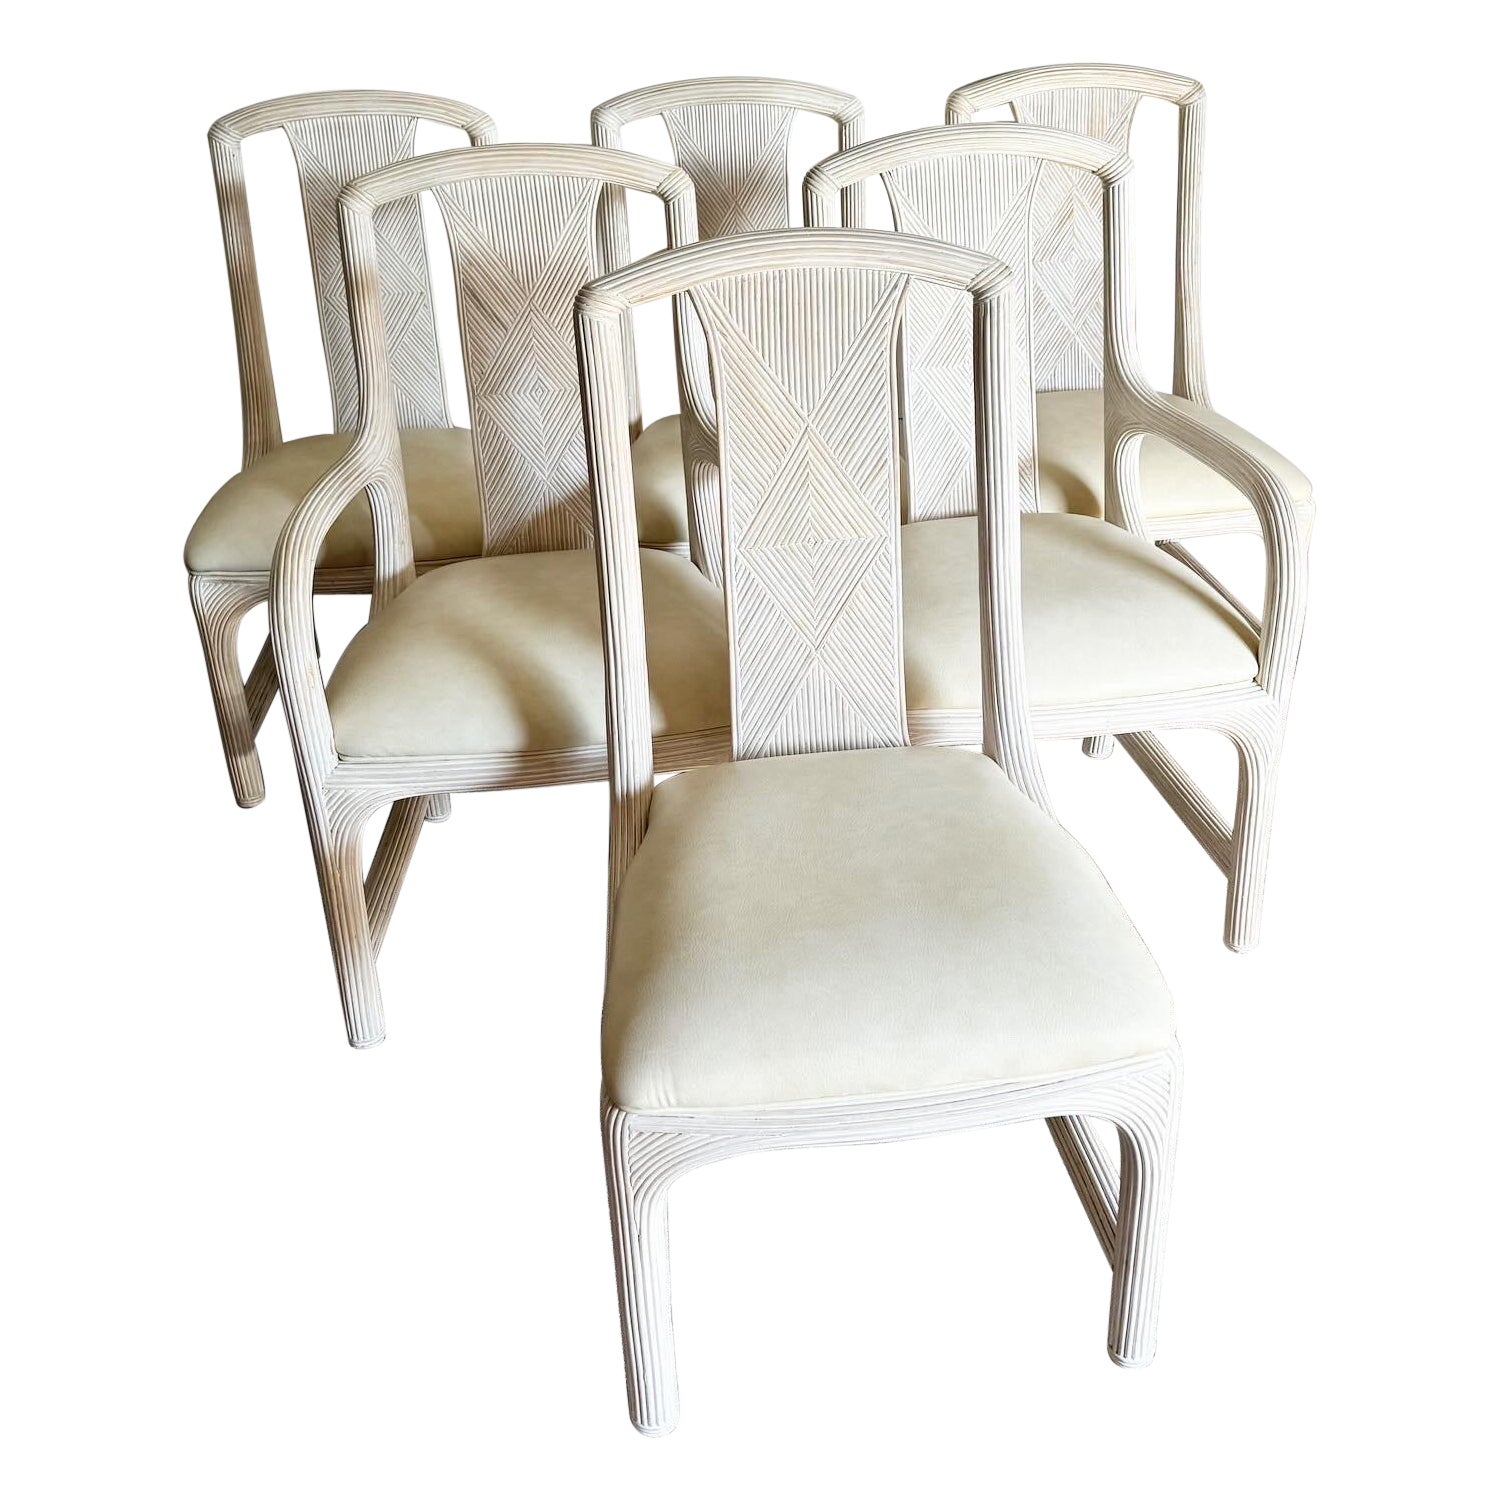 Boho Chic Pencil Reed Dining Chairs With Faux Leather Seat Cushions - Set of 6 For Sale